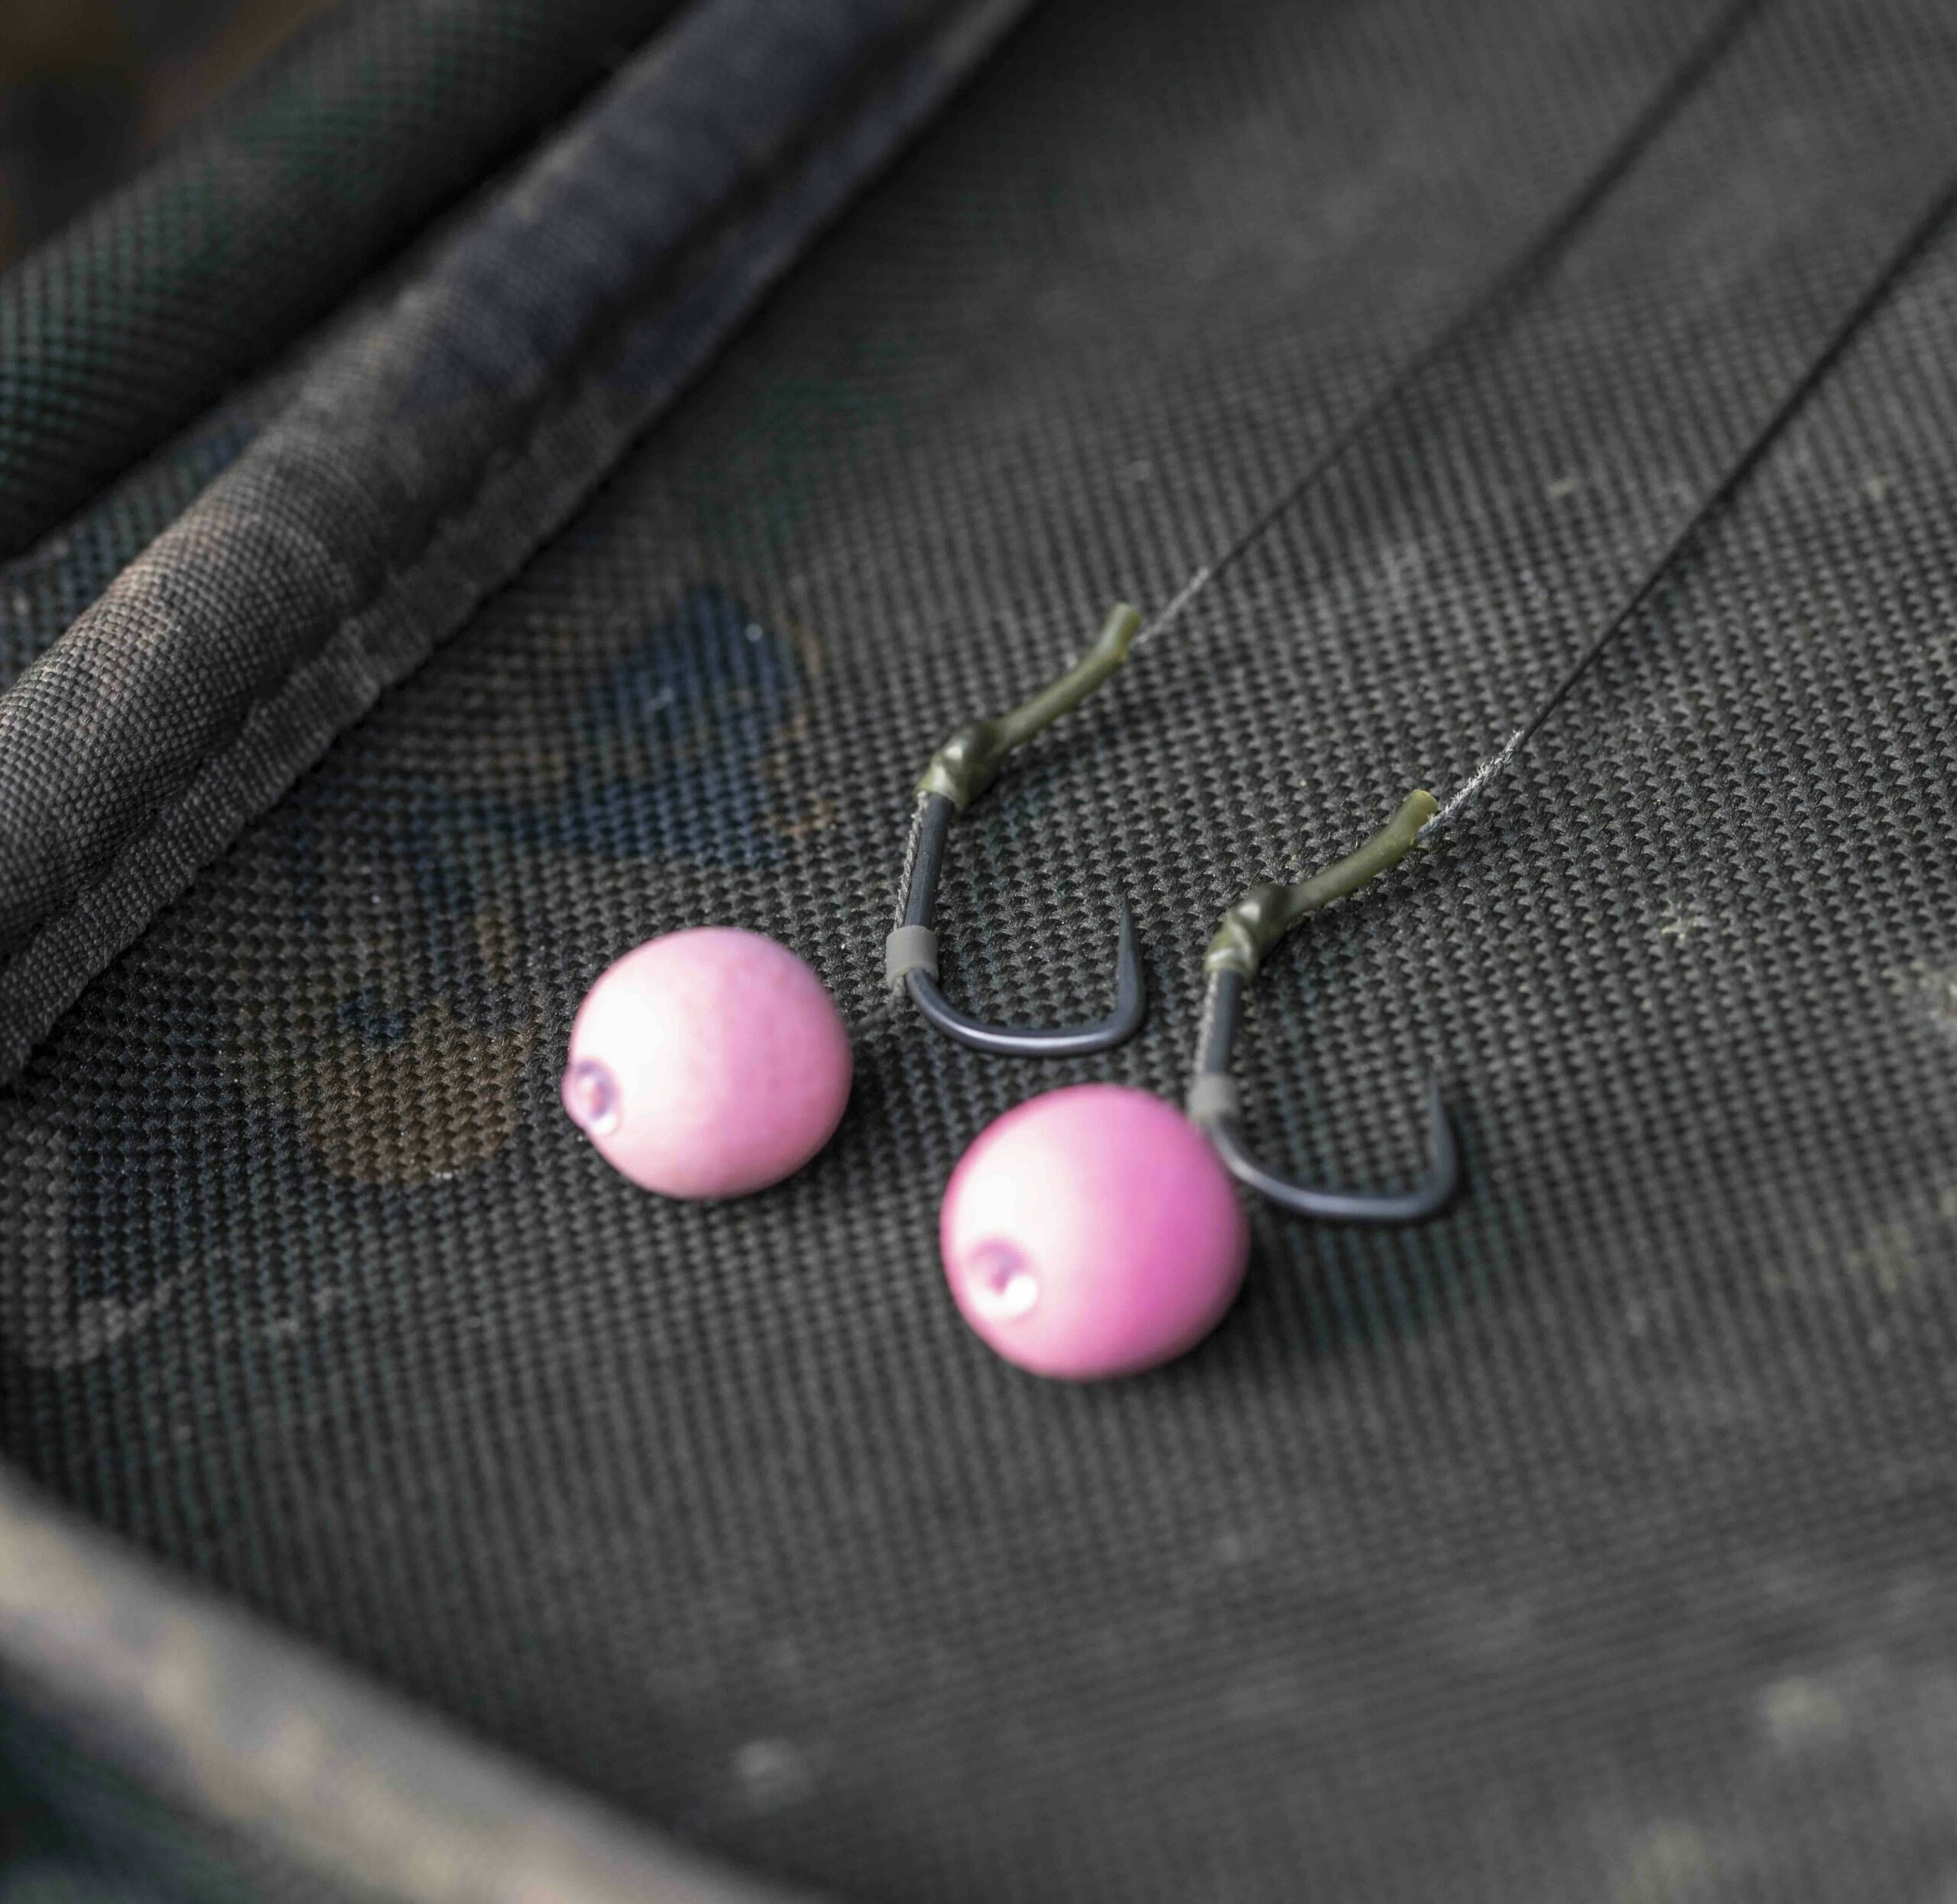 A simple rig will always be less prone to tangling.